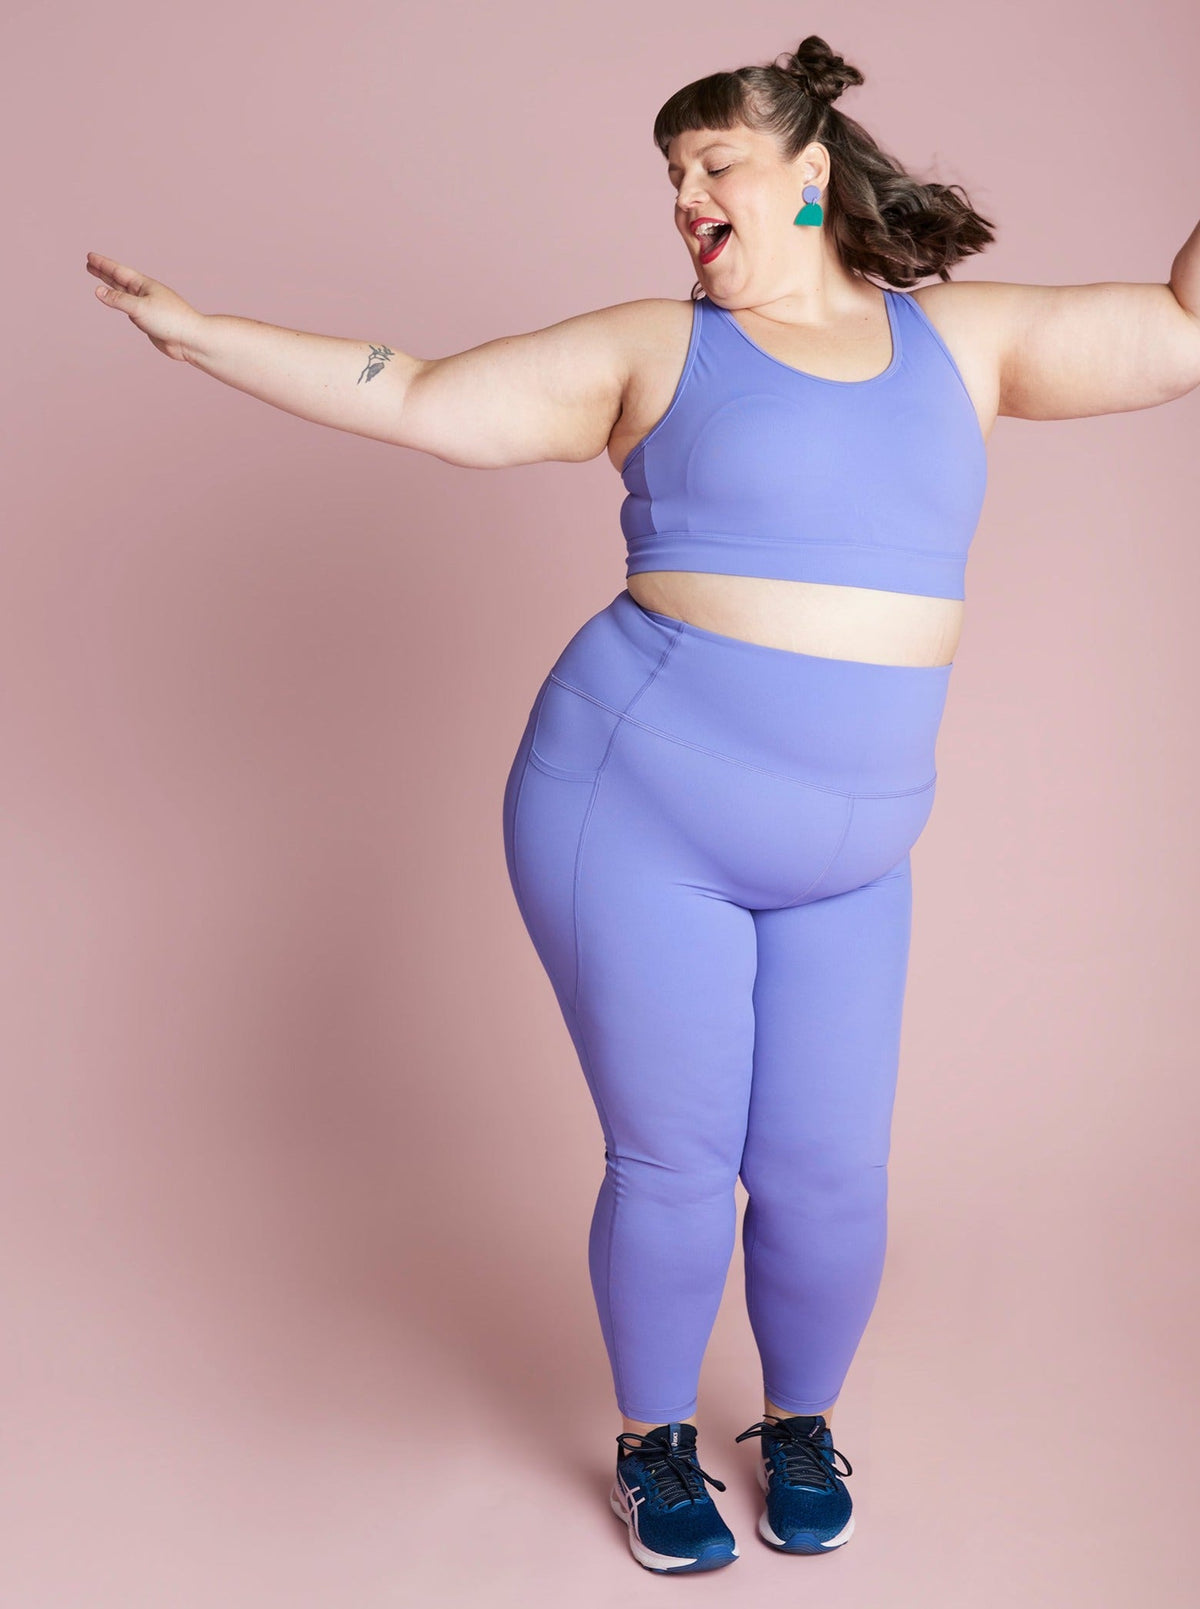 Periwinkle Purple Everyday Legging - 7/8 length - high waisted leggings with pockets plus size